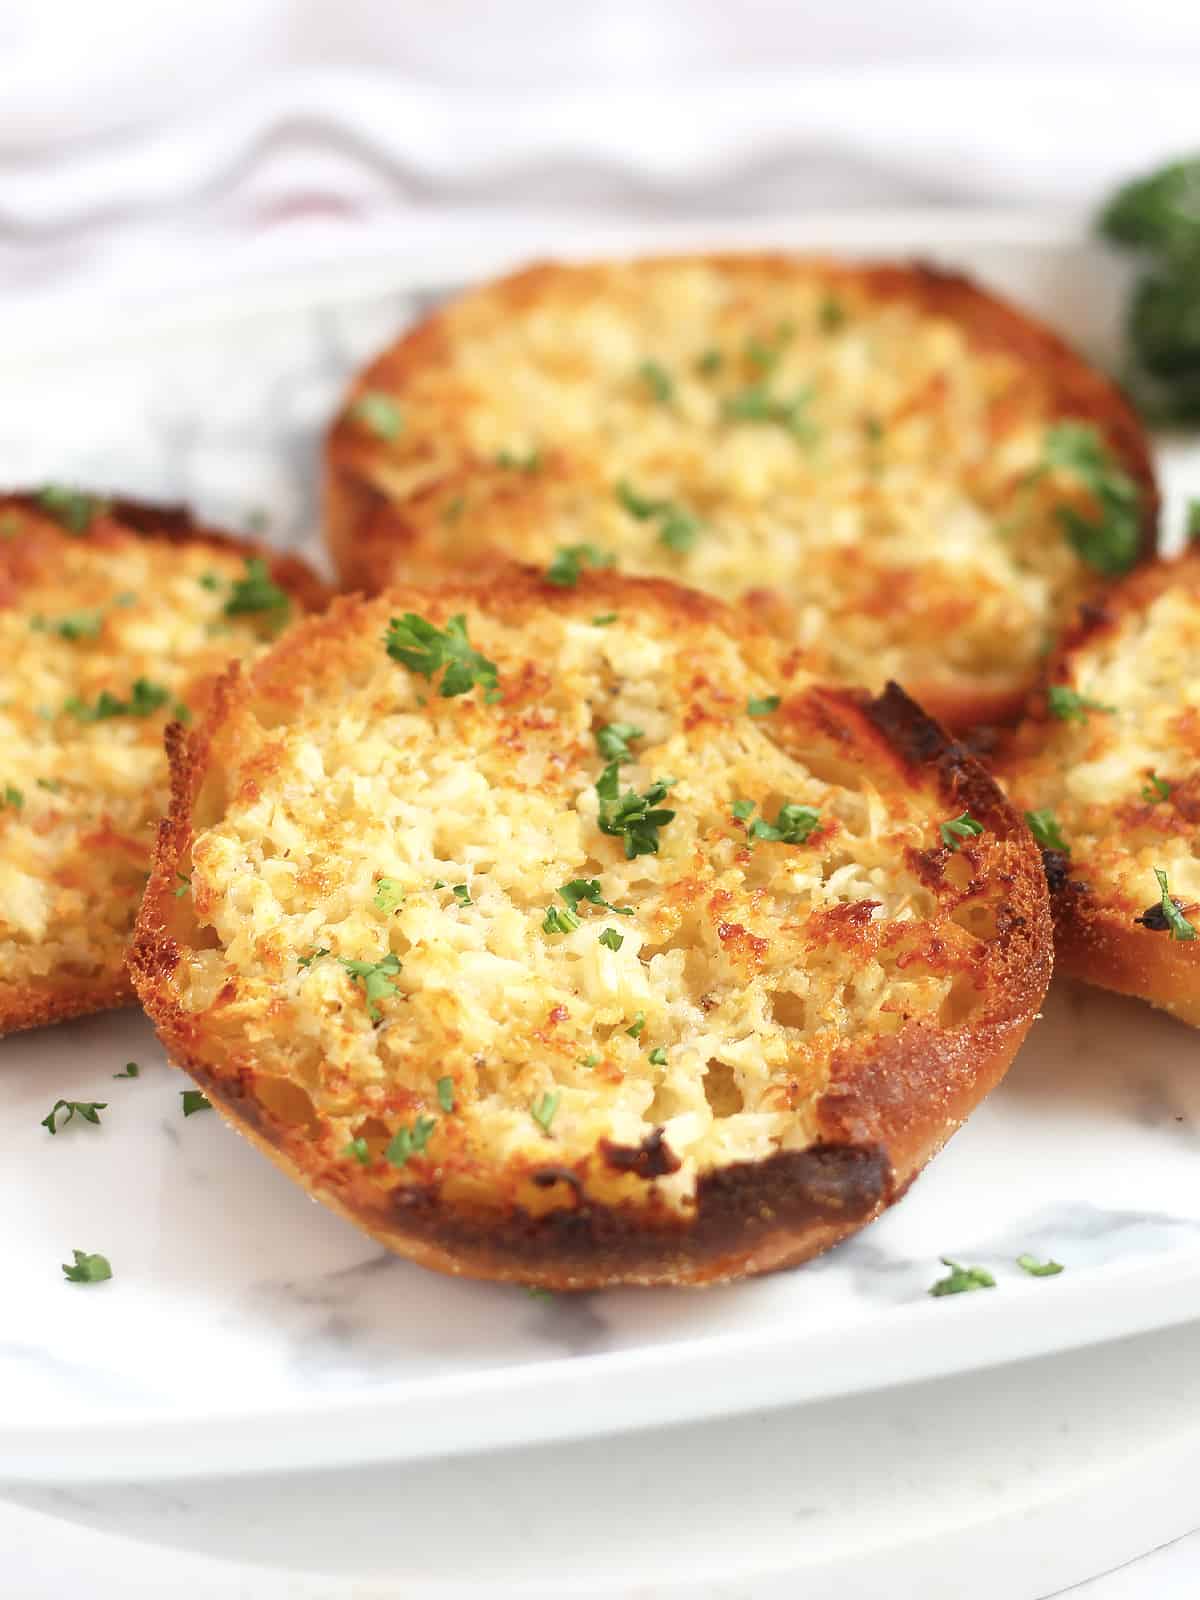 Golden brown English muffin with parmesan and garlic butter.